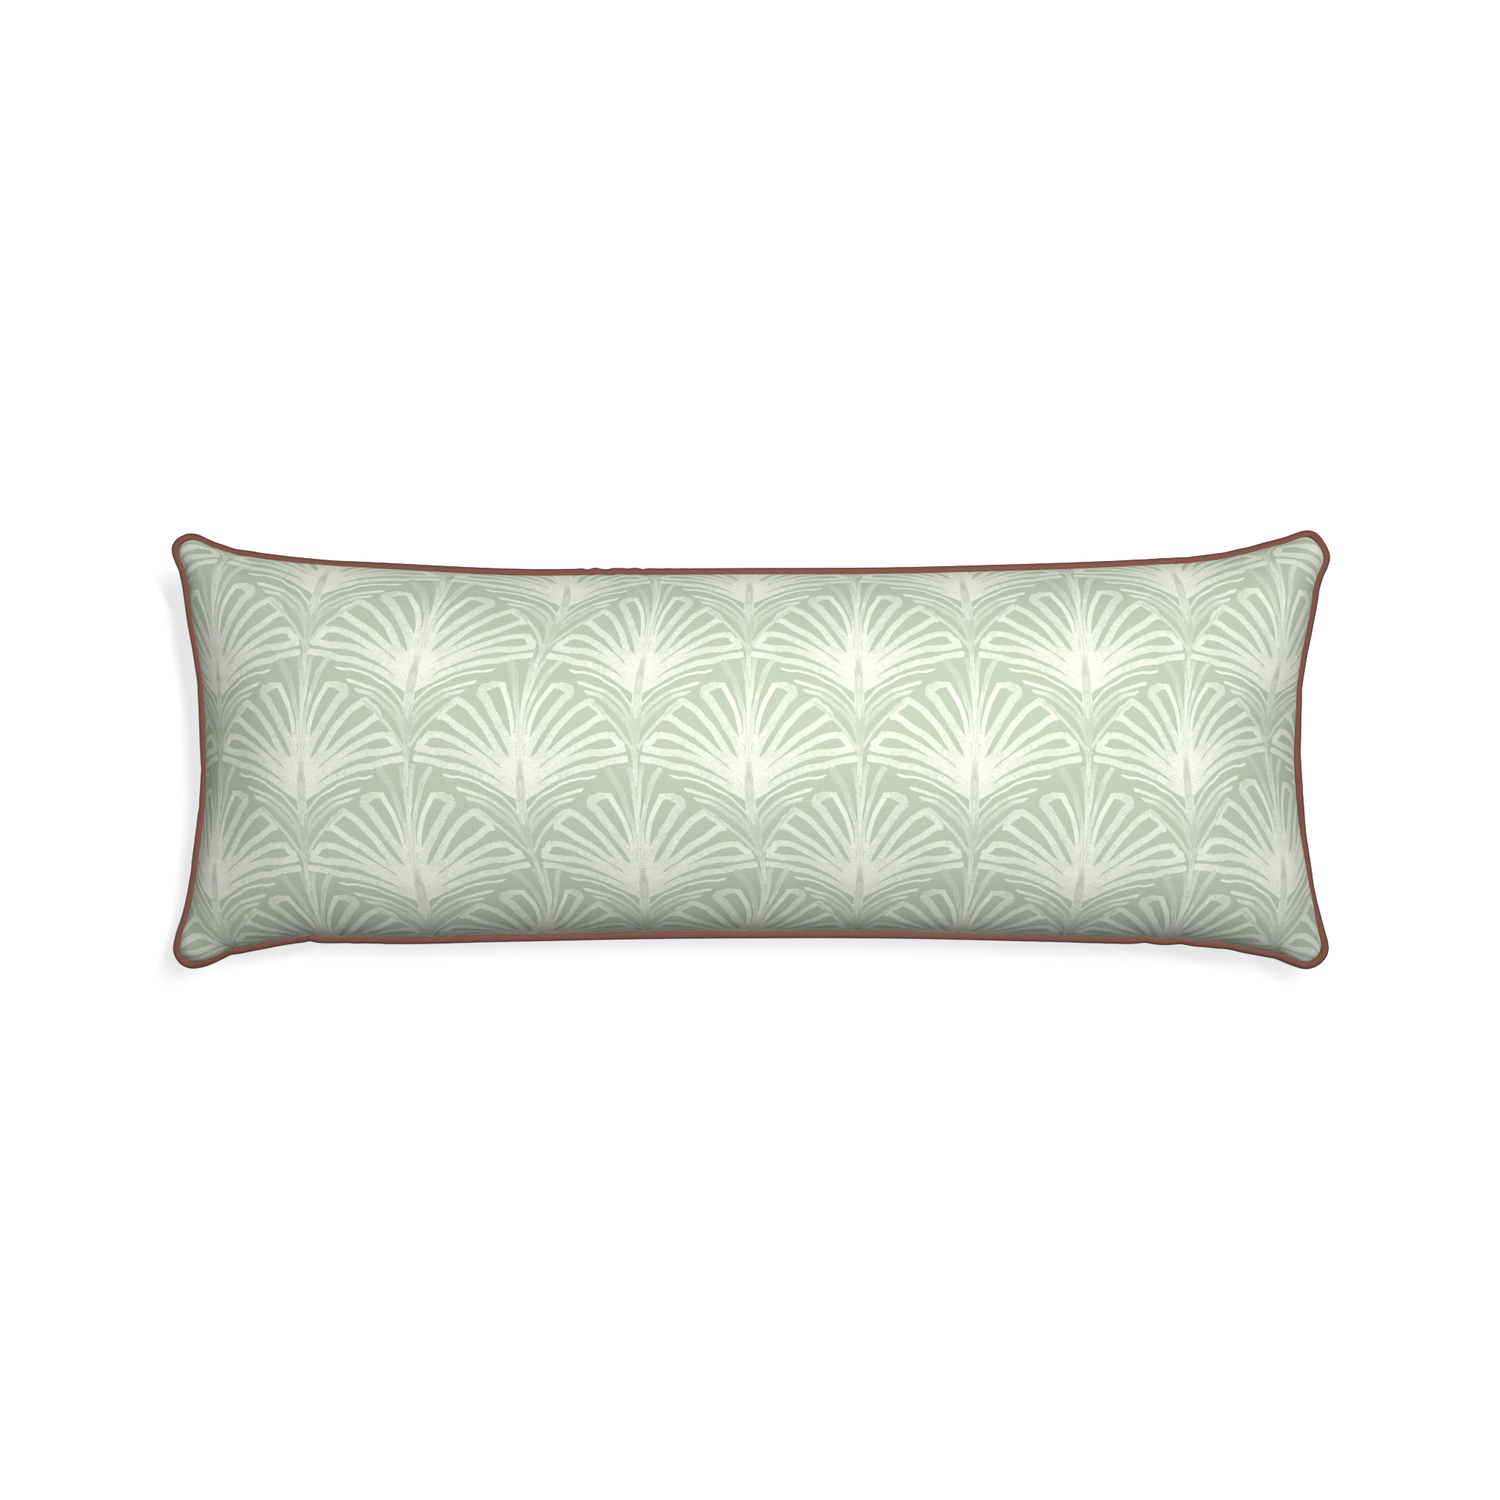 Xl-lumbar suzy sage custom sage green palmpillow with w piping on white background